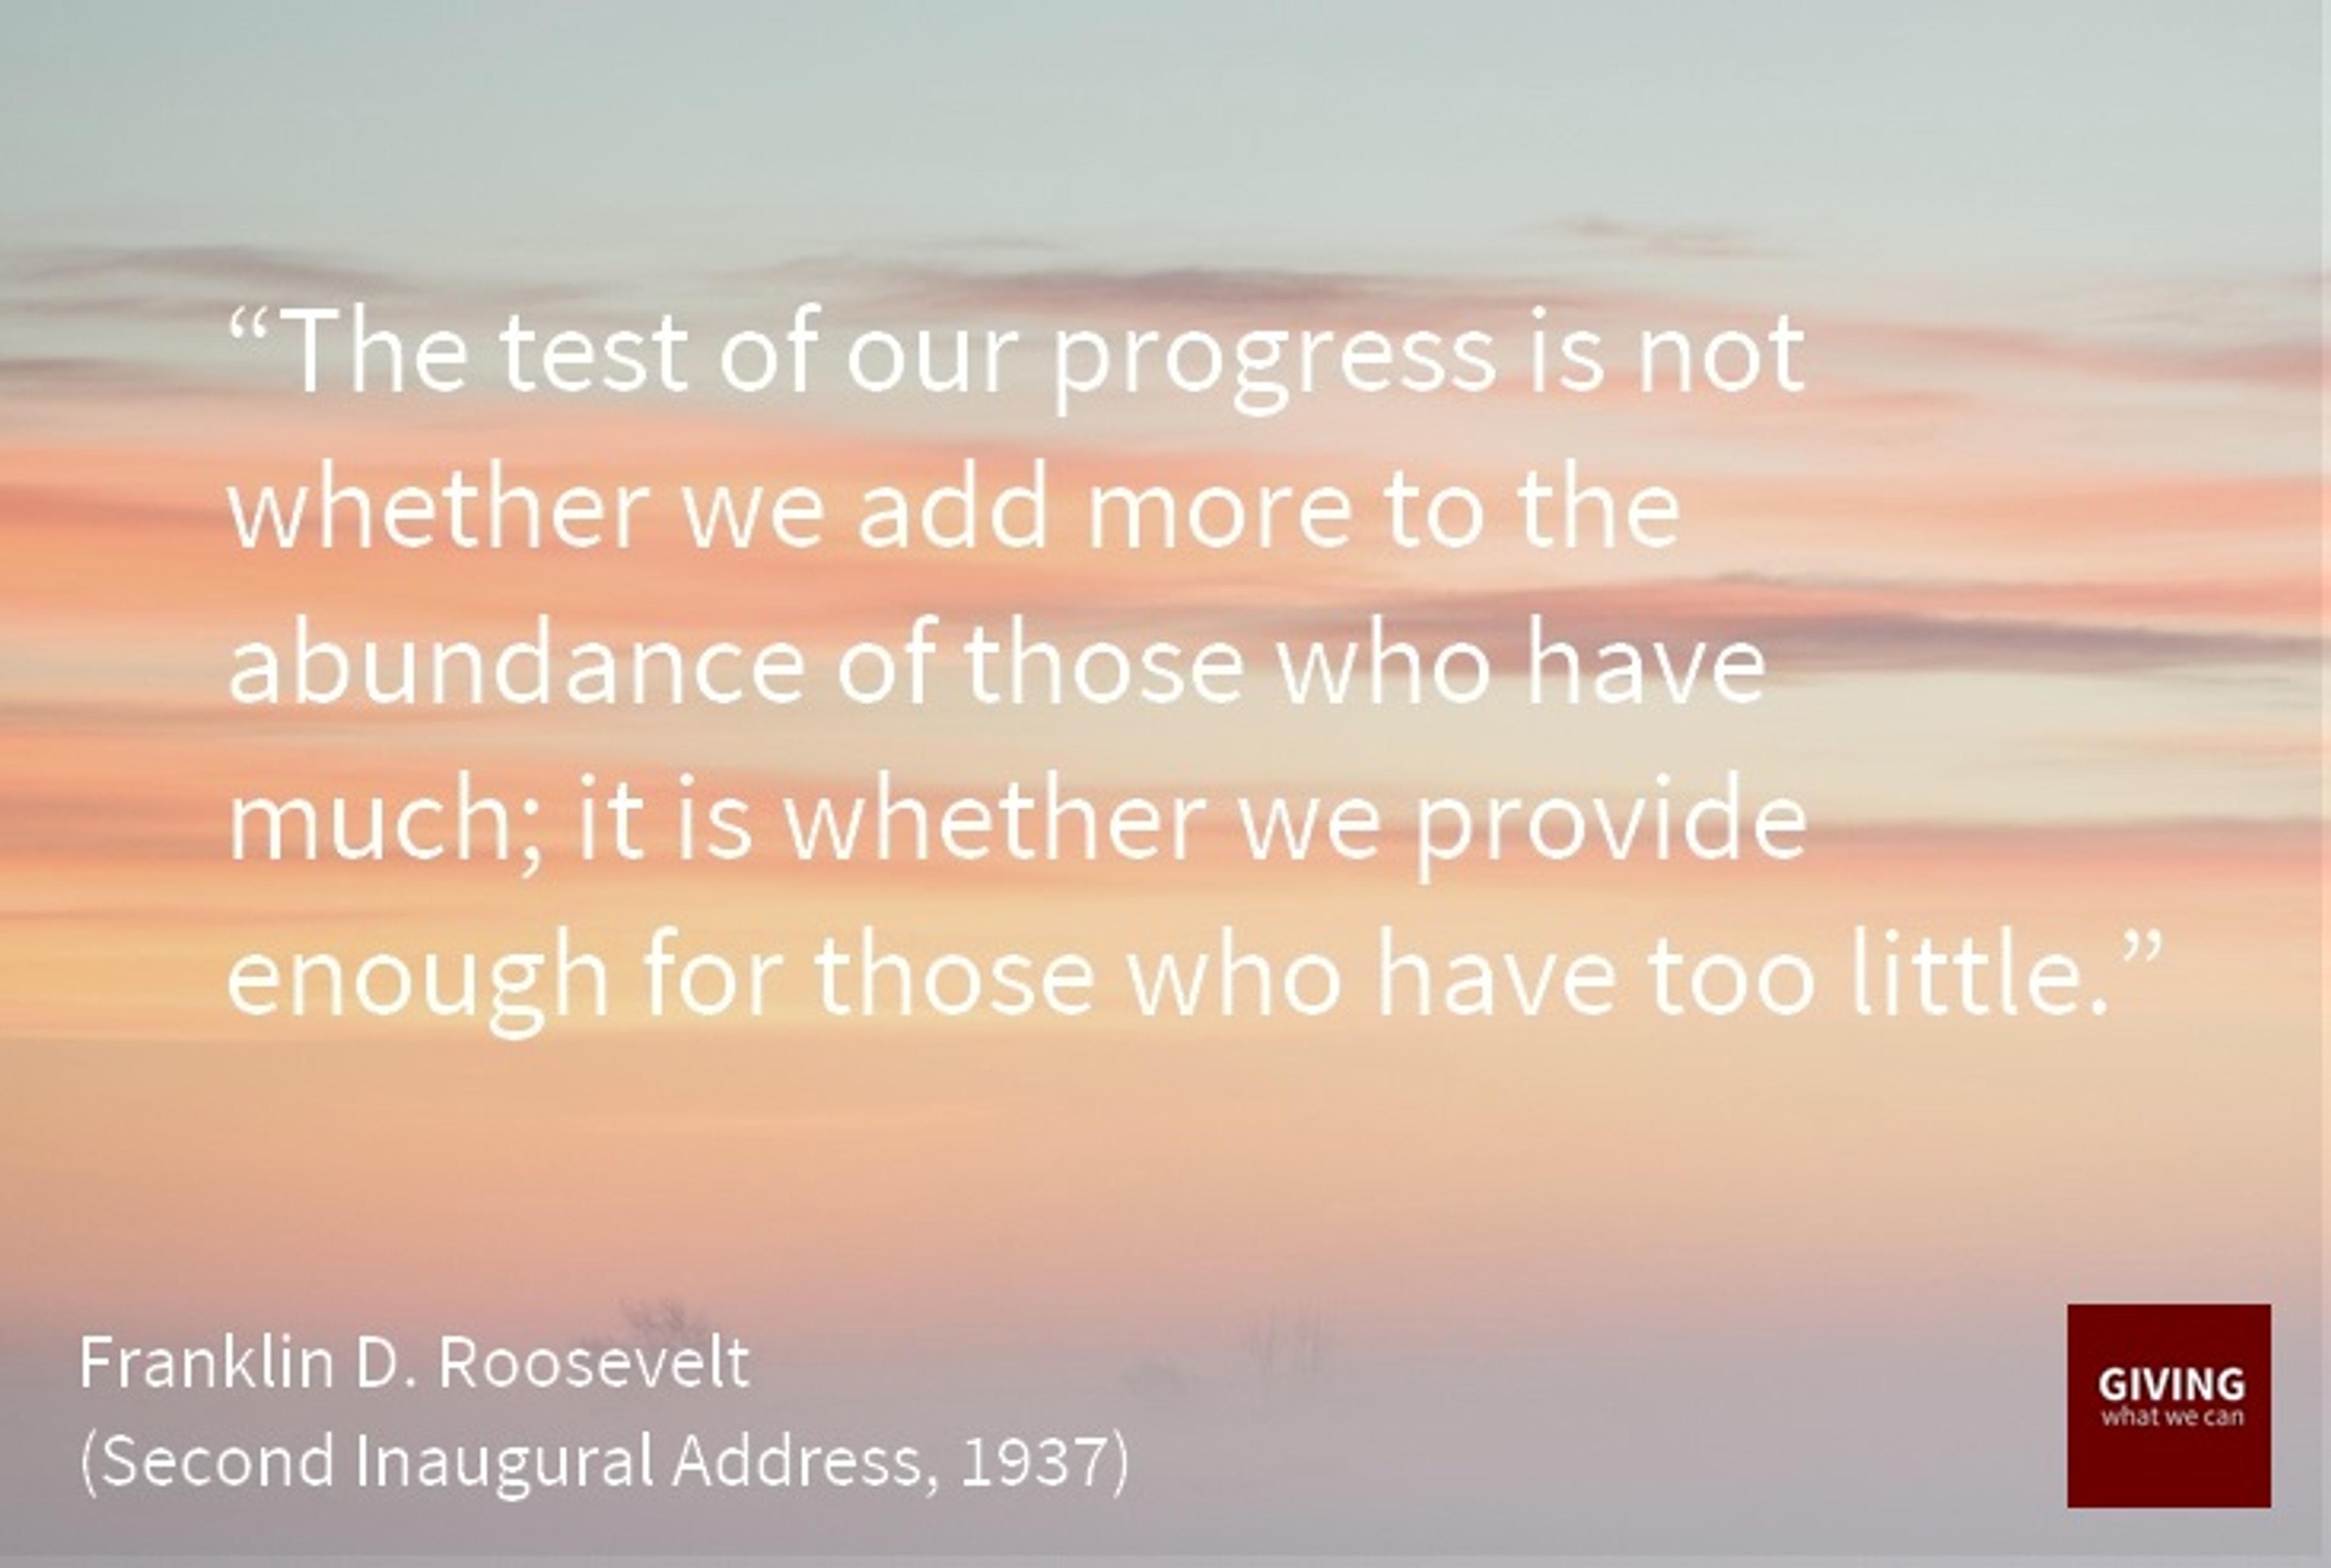 The test of our progress is whether we provide enough for those who have too little